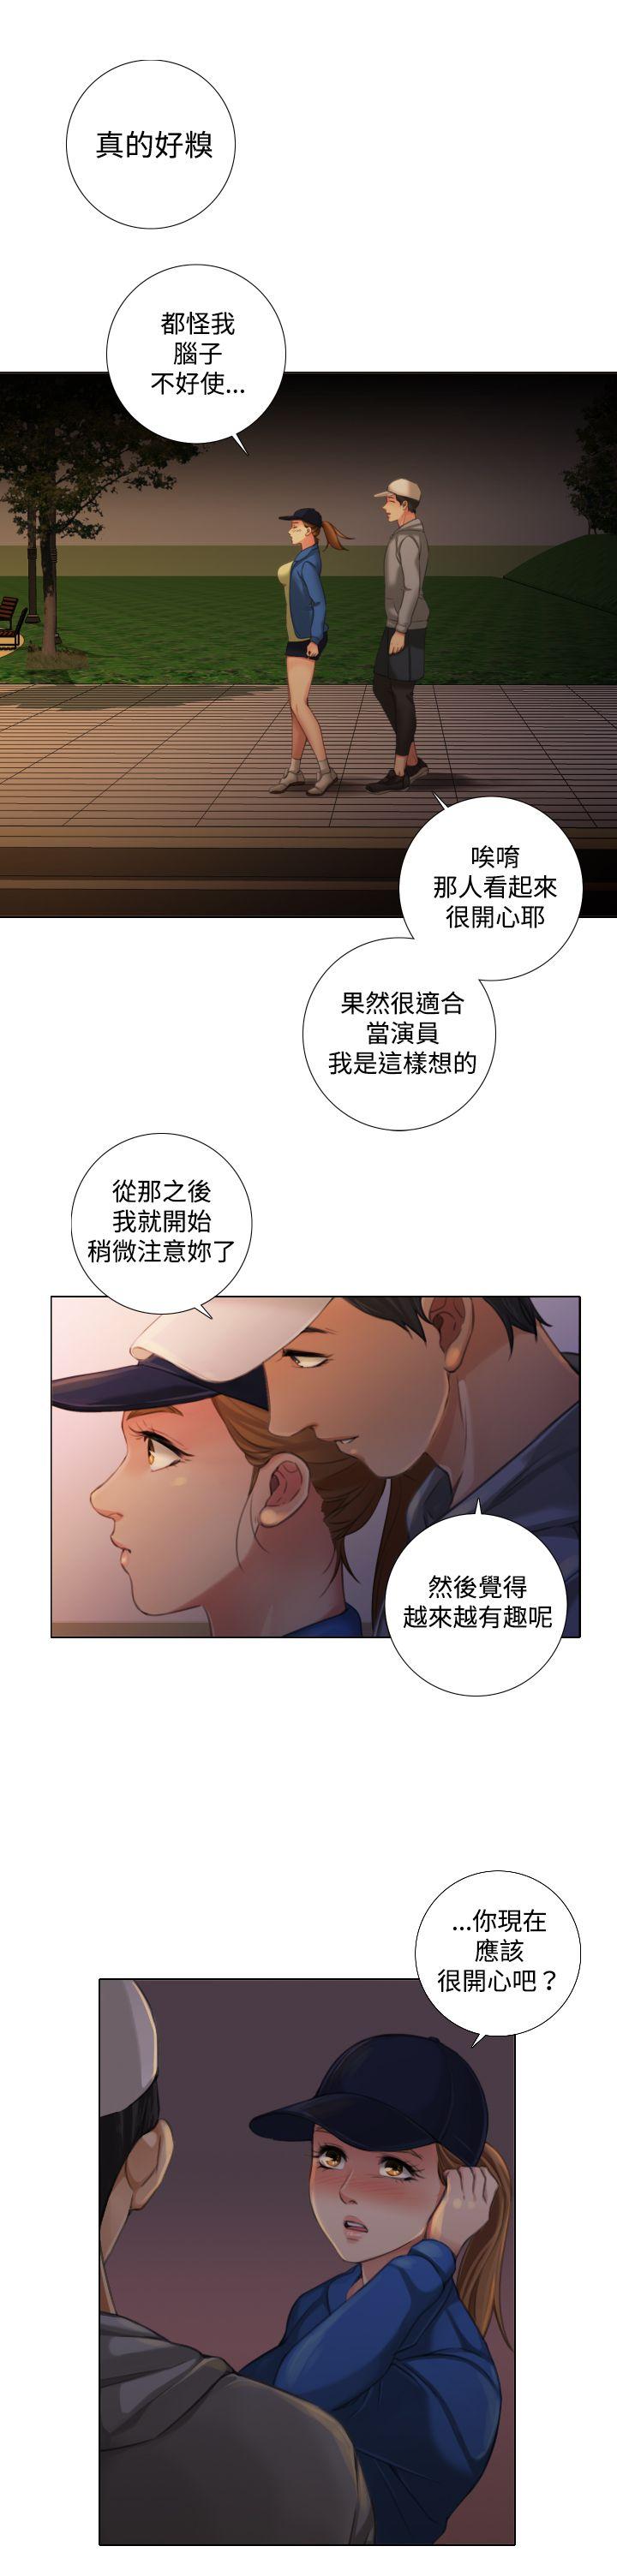 《TOUCH ME》漫画 第11话